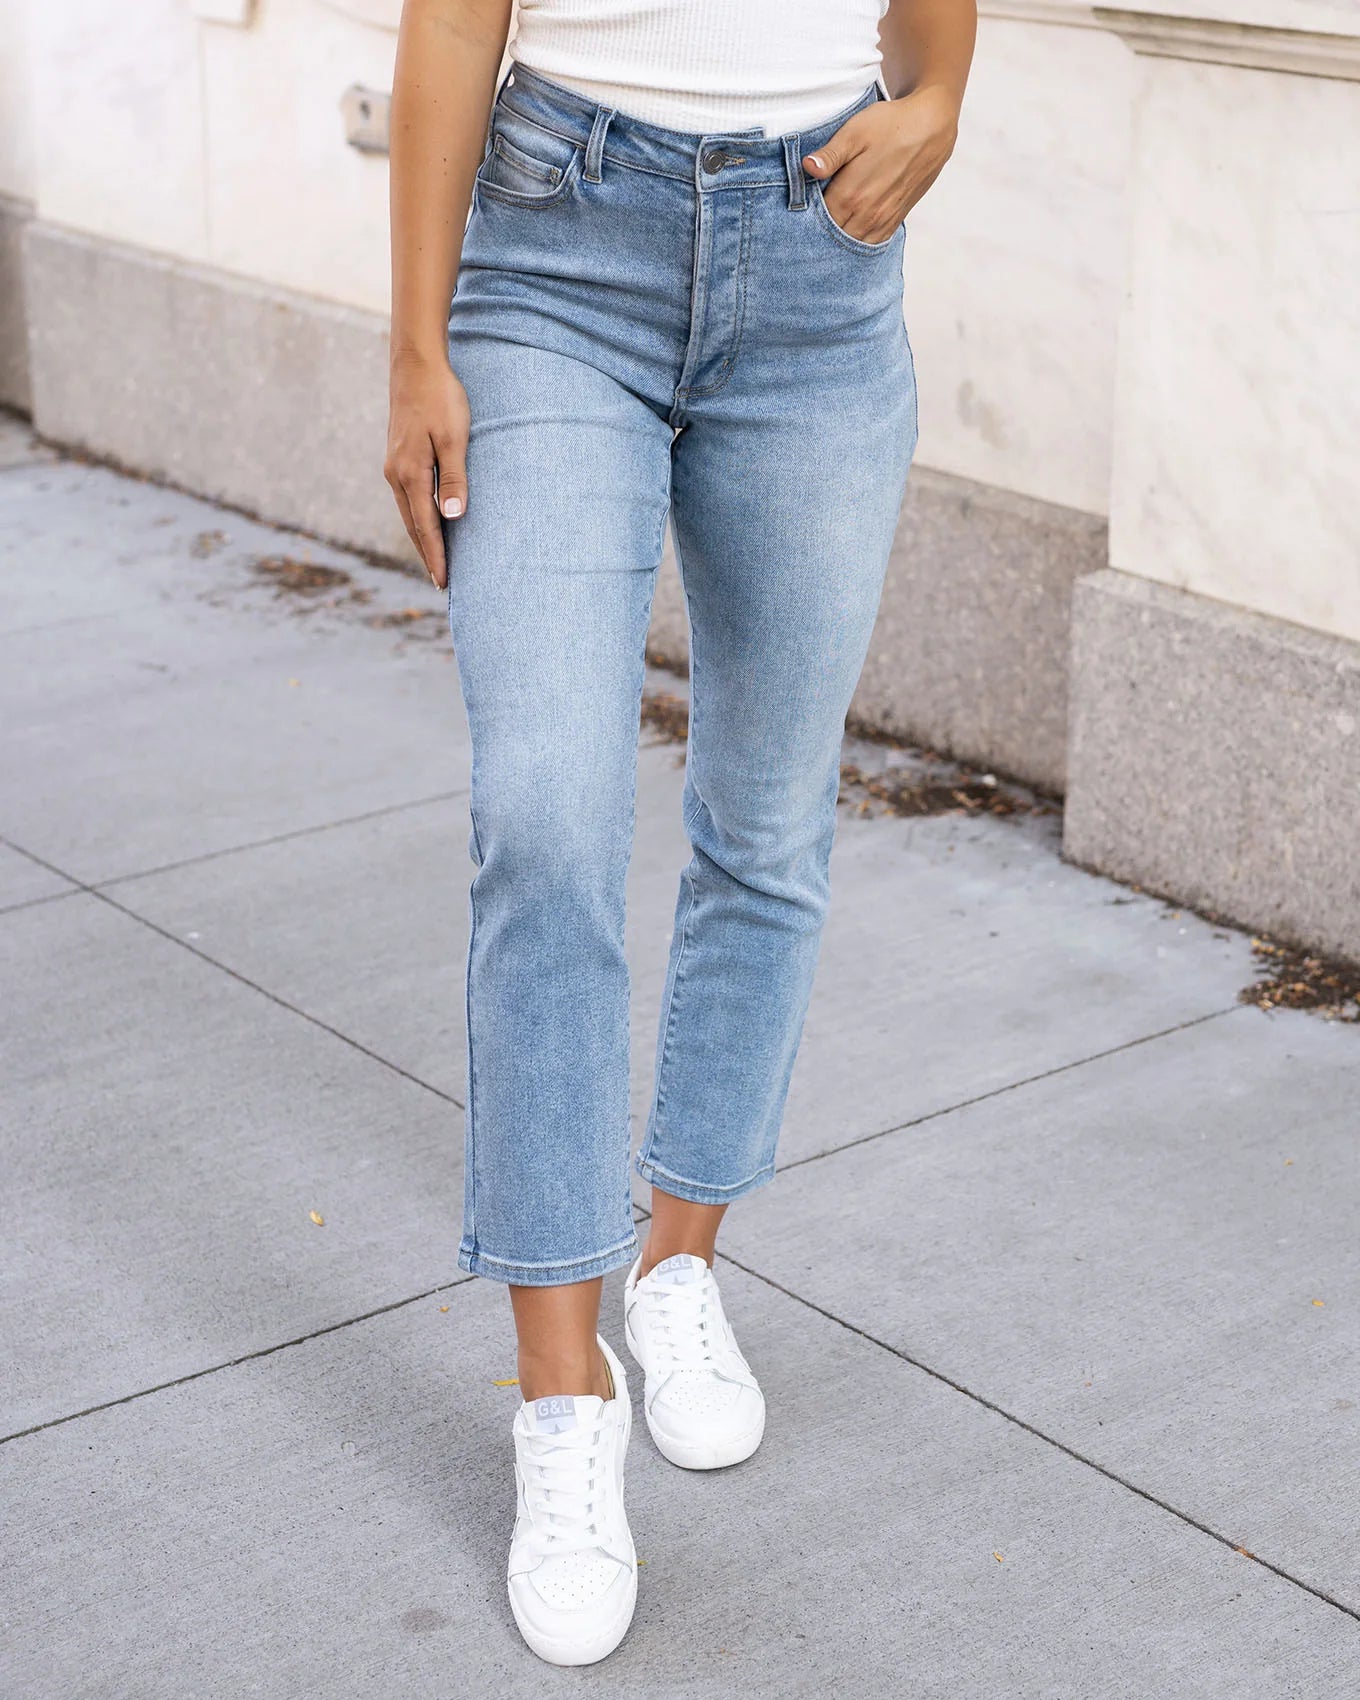 Premium Denim High Waisted Mom Jeans Fall-Winter grace & lace